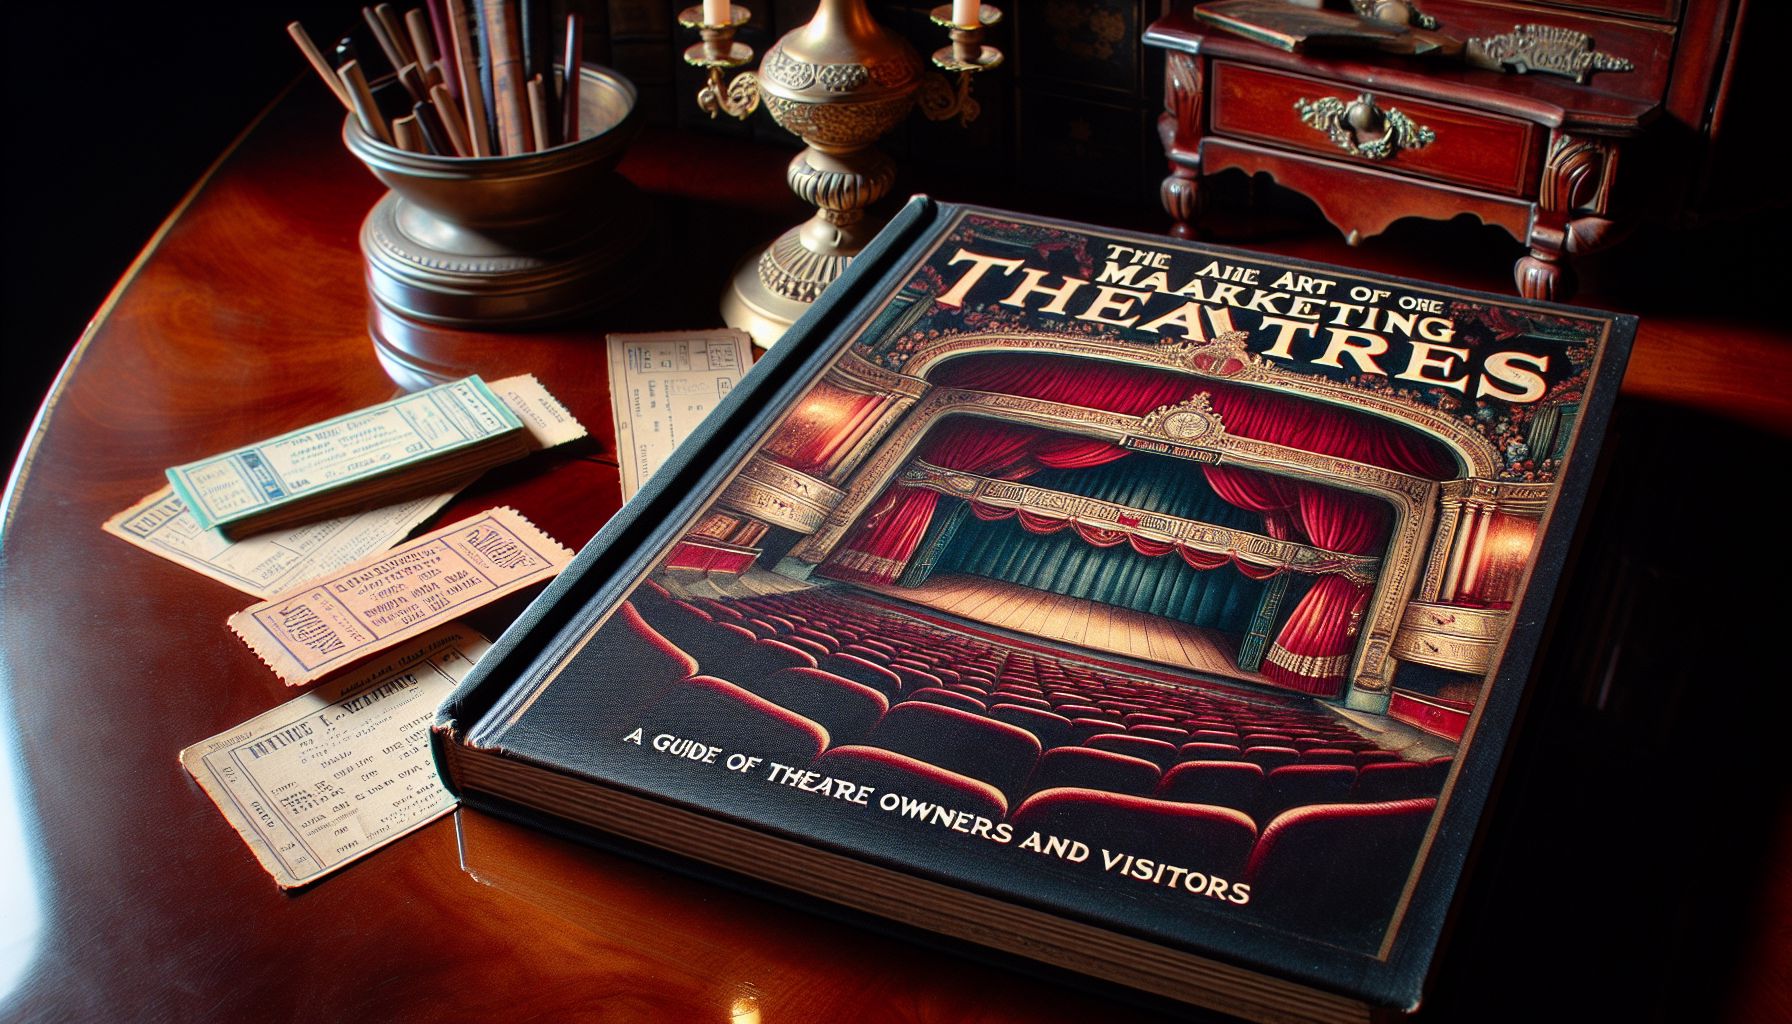 #The Art of Marketing Theatres: A Guide for Theatre Owners and Visitors